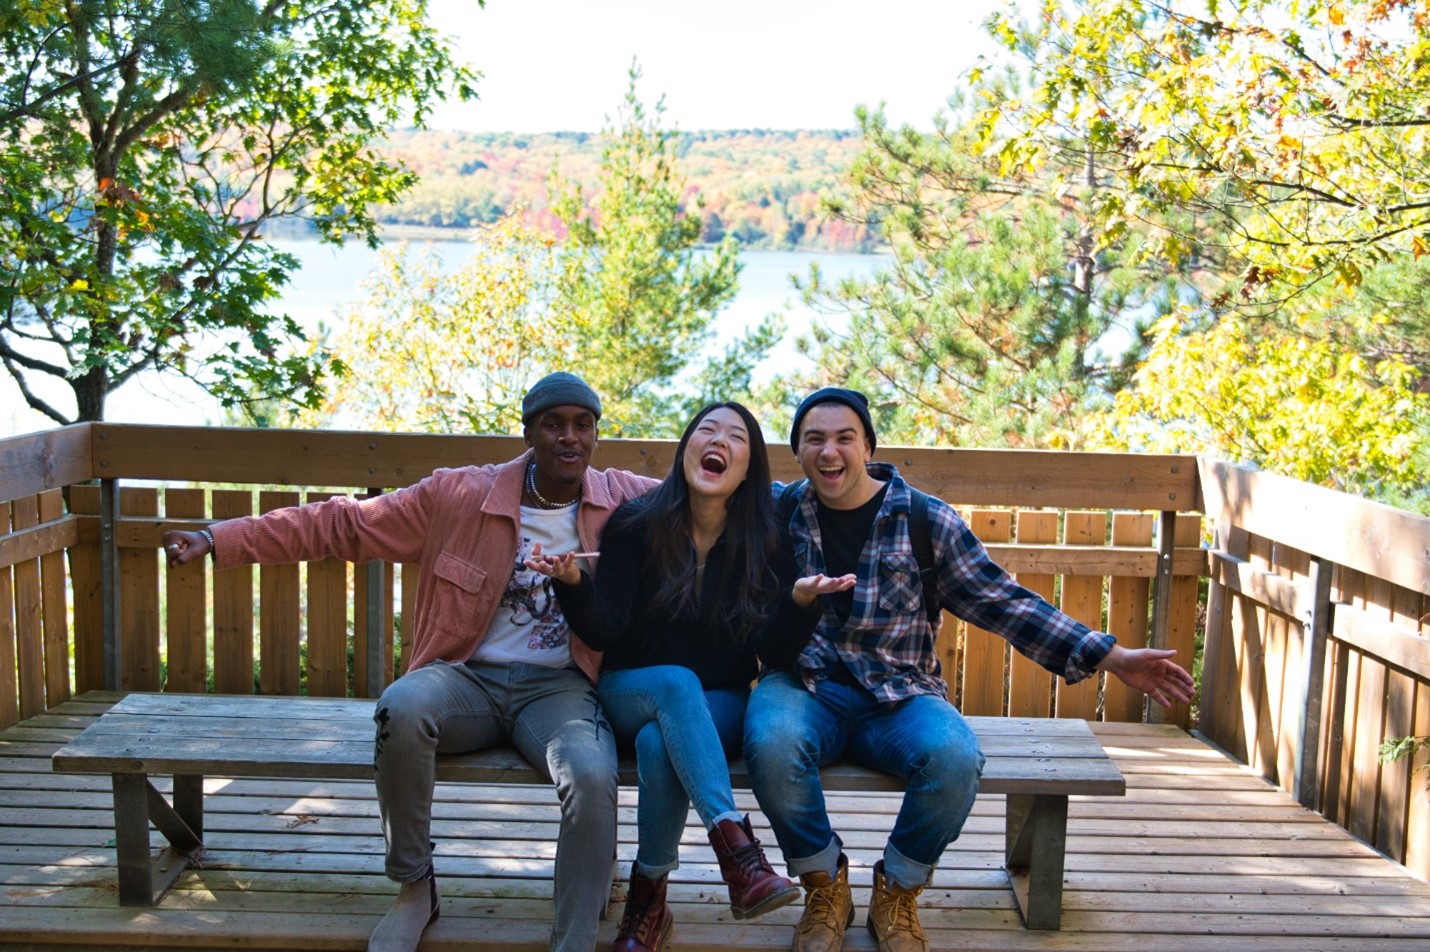 Three young adults sitting on a bench in a forest, smiling widely at the camera with their arms outstretched